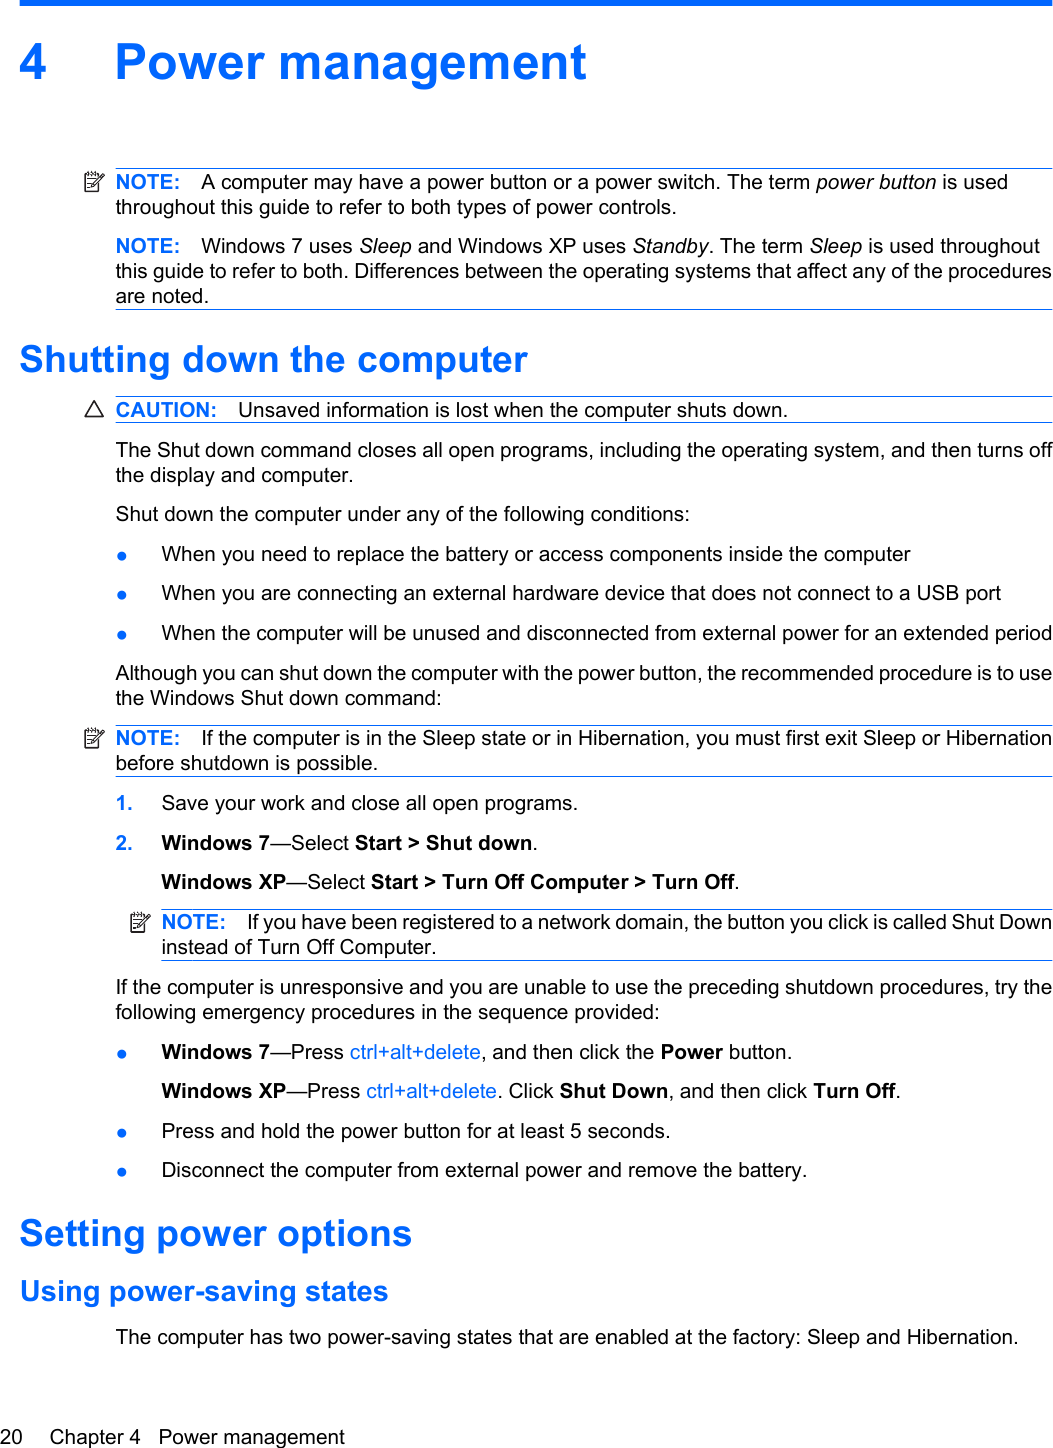 4 Power managementNOTE: A computer may have a power button or a power switch. The term power button is usedthroughout this guide to refer to both types of power controls.NOTE: Windows 7 uses Sleep and Windows XP uses Standby. The term Sleep is used throughoutthis guide to refer to both. Differences between the operating systems that affect any of the proceduresare noted.Shutting down the computerCAUTION: Unsaved information is lost when the computer shuts down.The Shut down command closes all open programs, including the operating system, and then turns offthe display and computer.Shut down the computer under any of the following conditions:●When you need to replace the battery or access components inside the computer●When you are connecting an external hardware device that does not connect to a USB port●When the computer will be unused and disconnected from external power for an extended periodAlthough you can shut down the computer with the power button, the recommended procedure is to usethe Windows Shut down command:NOTE: If the computer is in the Sleep state or in Hibernation, you must first exit Sleep or Hibernationbefore shutdown is possible.1. Save your work and close all open programs.2. Windows 7—Select Start &gt; Shut down.Windows XP—Select Start &gt; Turn Off Computer &gt; Turn Off.NOTE: If you have been registered to a network domain, the button you click is called Shut Downinstead of Turn Off Computer.If the computer is unresponsive and you are unable to use the preceding shutdown procedures, try thefollowing emergency procedures in the sequence provided:●Windows 7—Press ctrl+alt+delete, and then click the Power button.Windows XP—Press ctrl+alt+delete. Click Shut Down, and then click Turn Off.●Press and hold the power button for at least 5 seconds.●Disconnect the computer from external power and remove the battery.Setting power optionsUsing power-saving statesThe computer has two power-saving states that are enabled at the factory: Sleep and Hibernation.20 Chapter 4   Power management